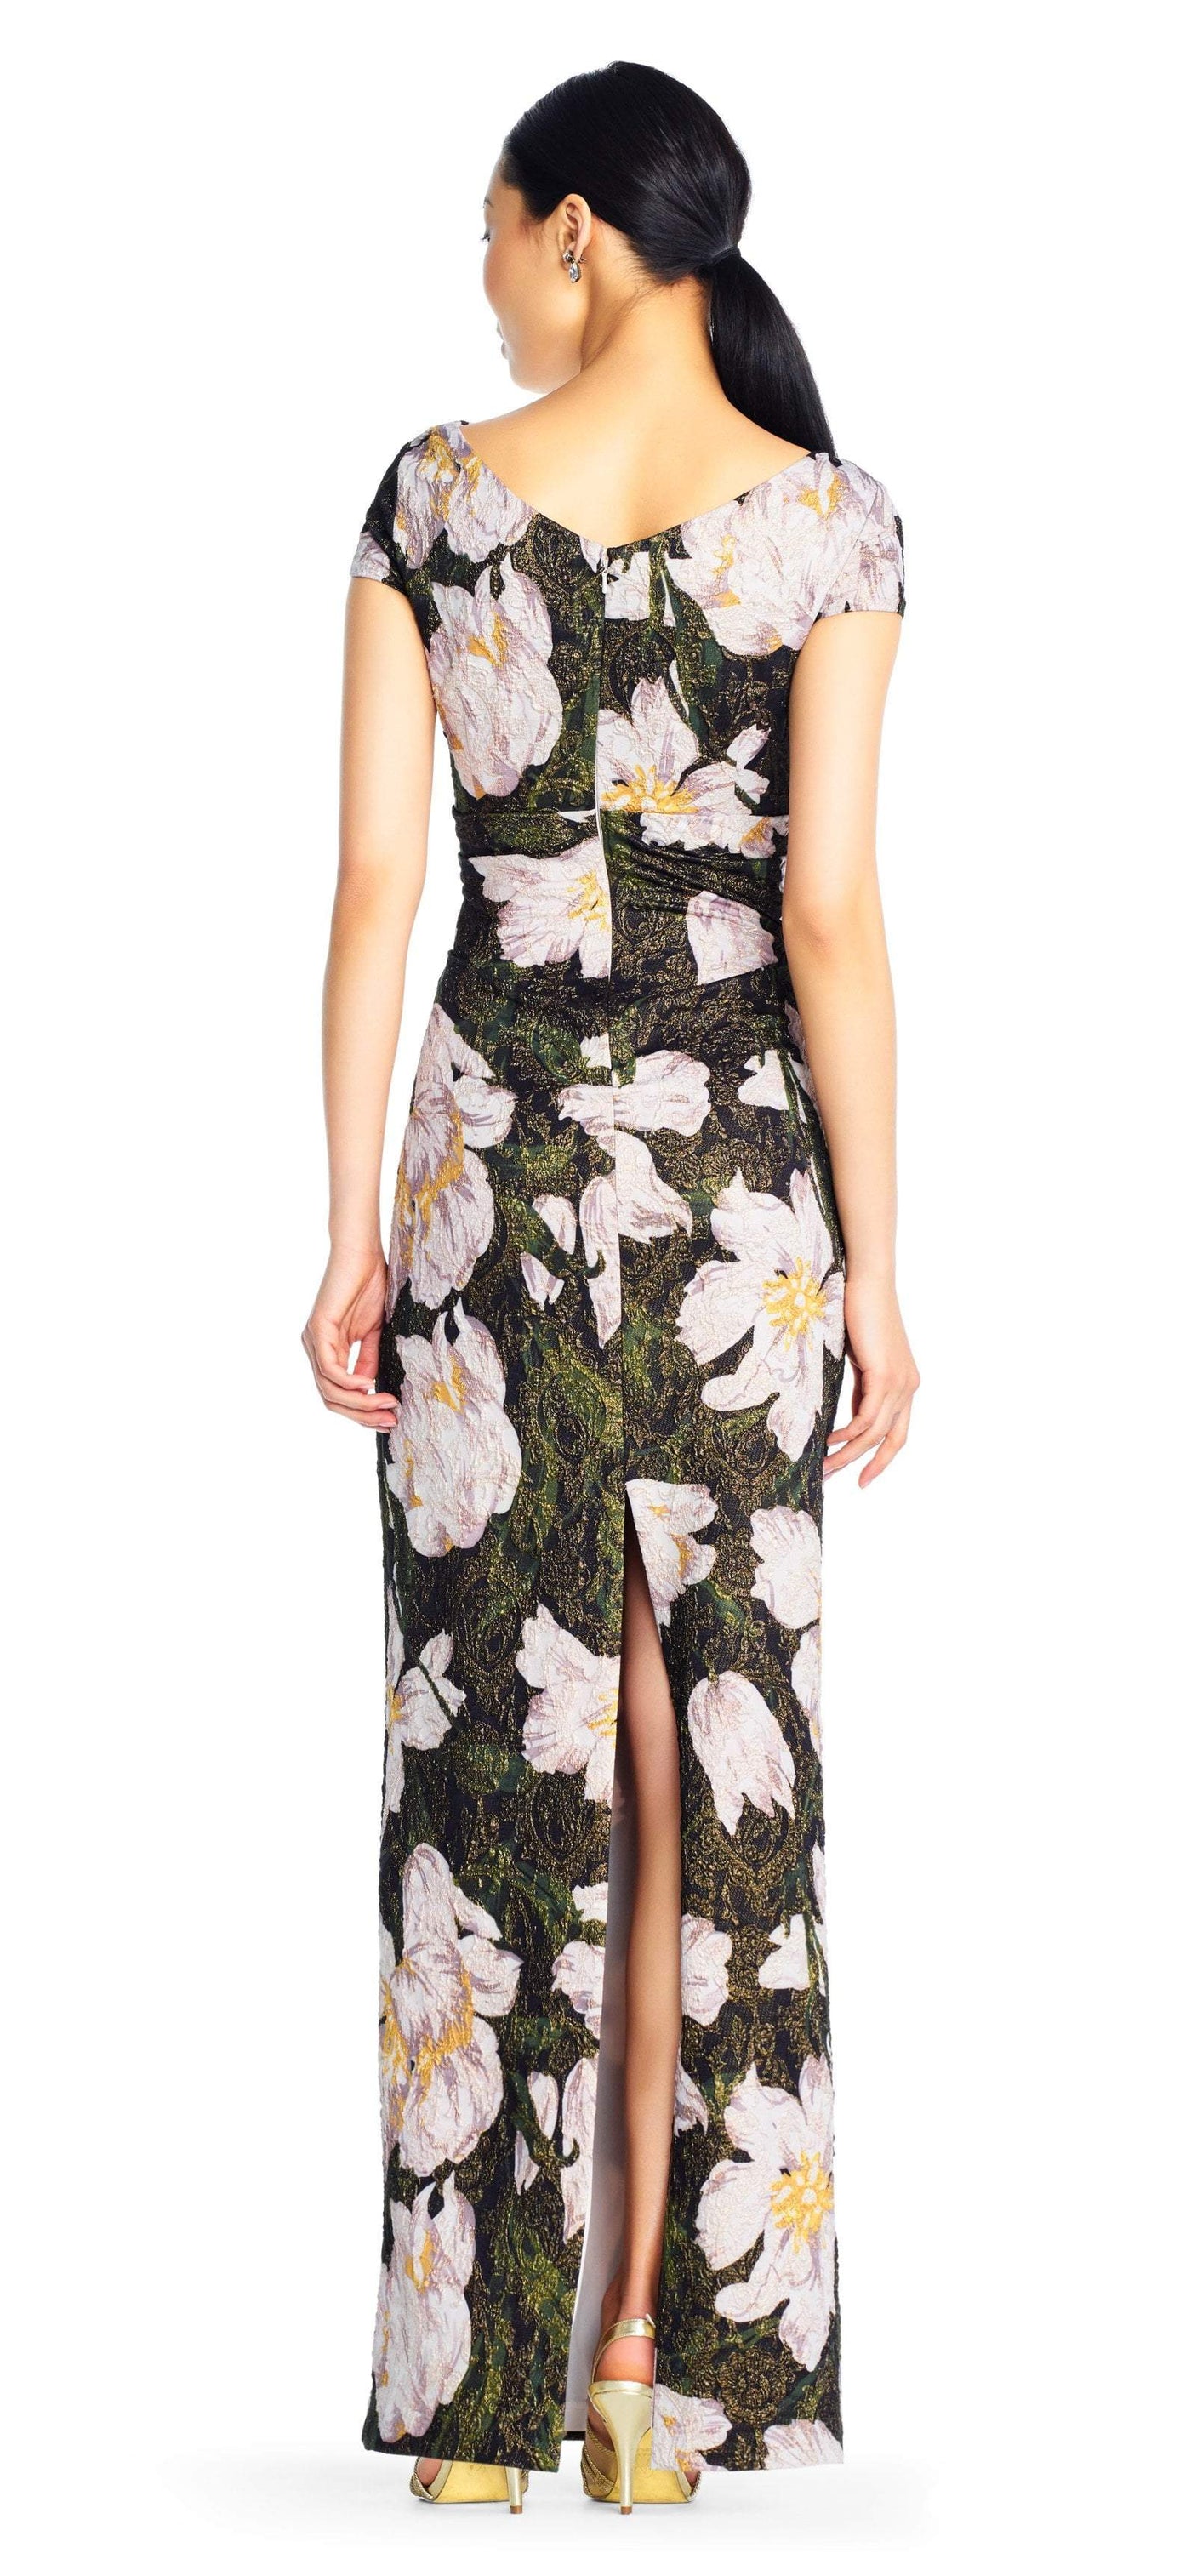 Adrianna Papell - AP1E203398 Floral Patterned Bateau Sheath Dress In White and Black